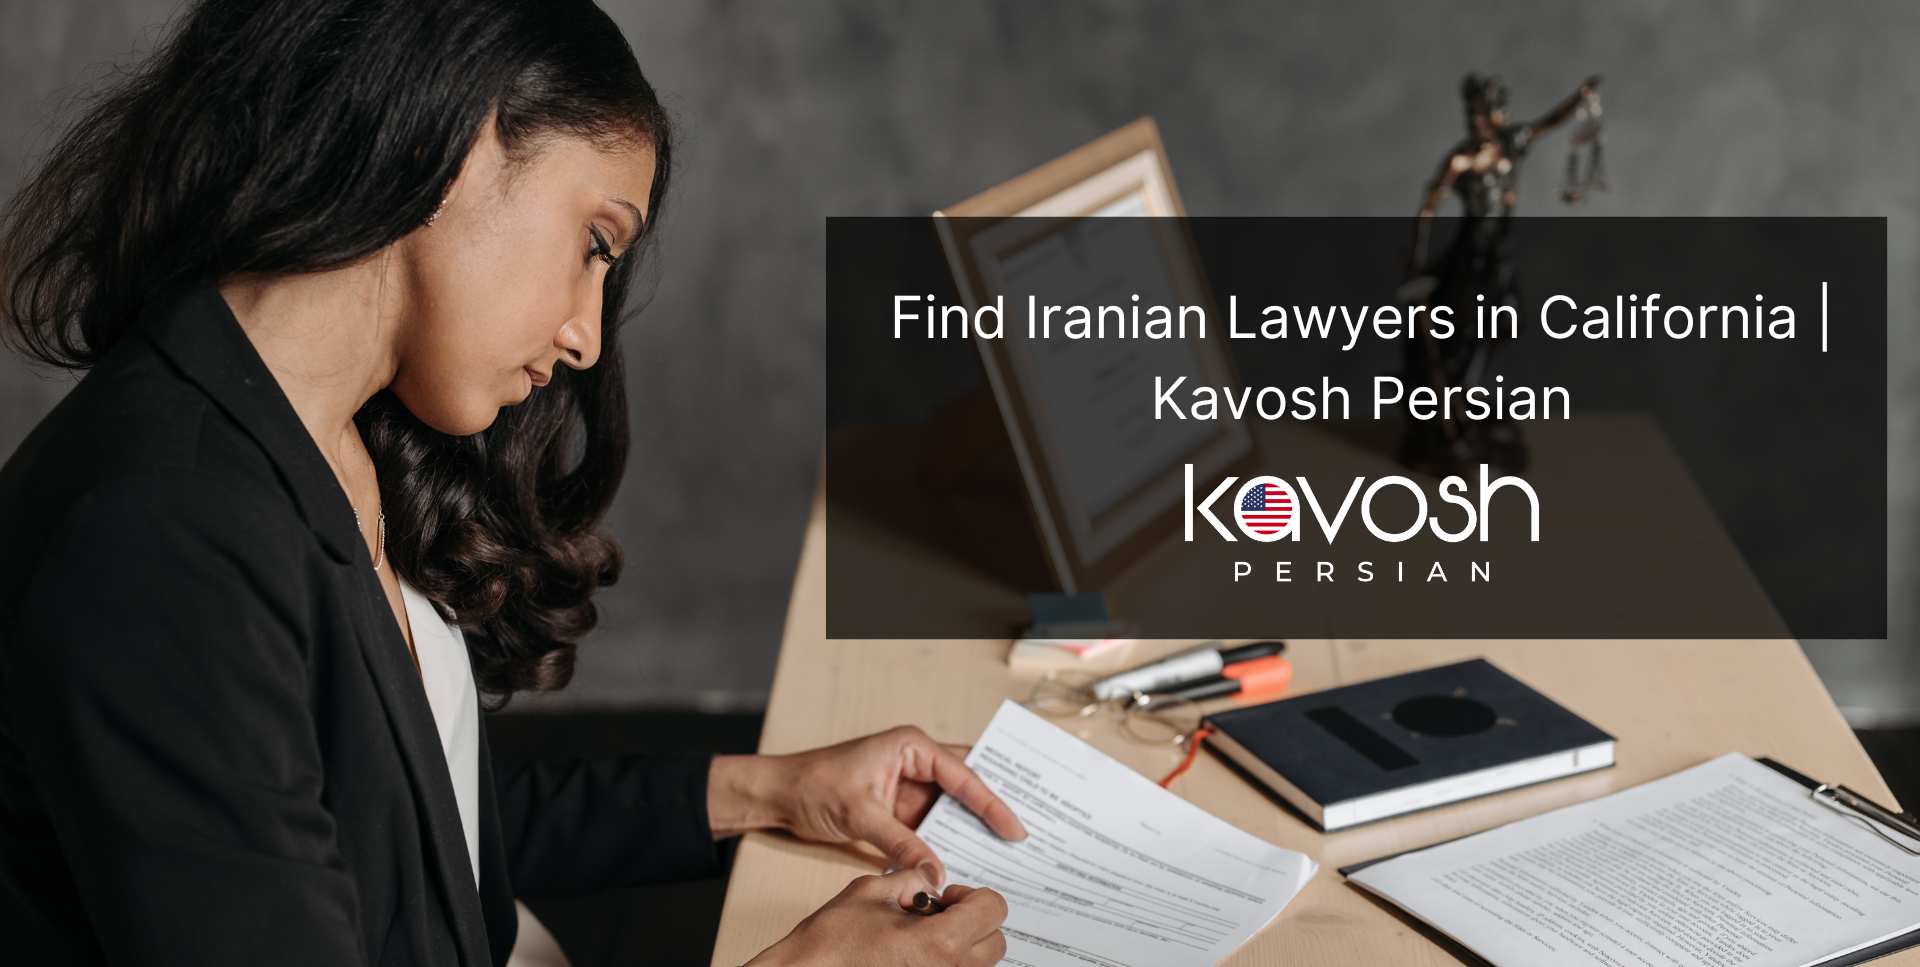 Find an Iranian Lawyer in California